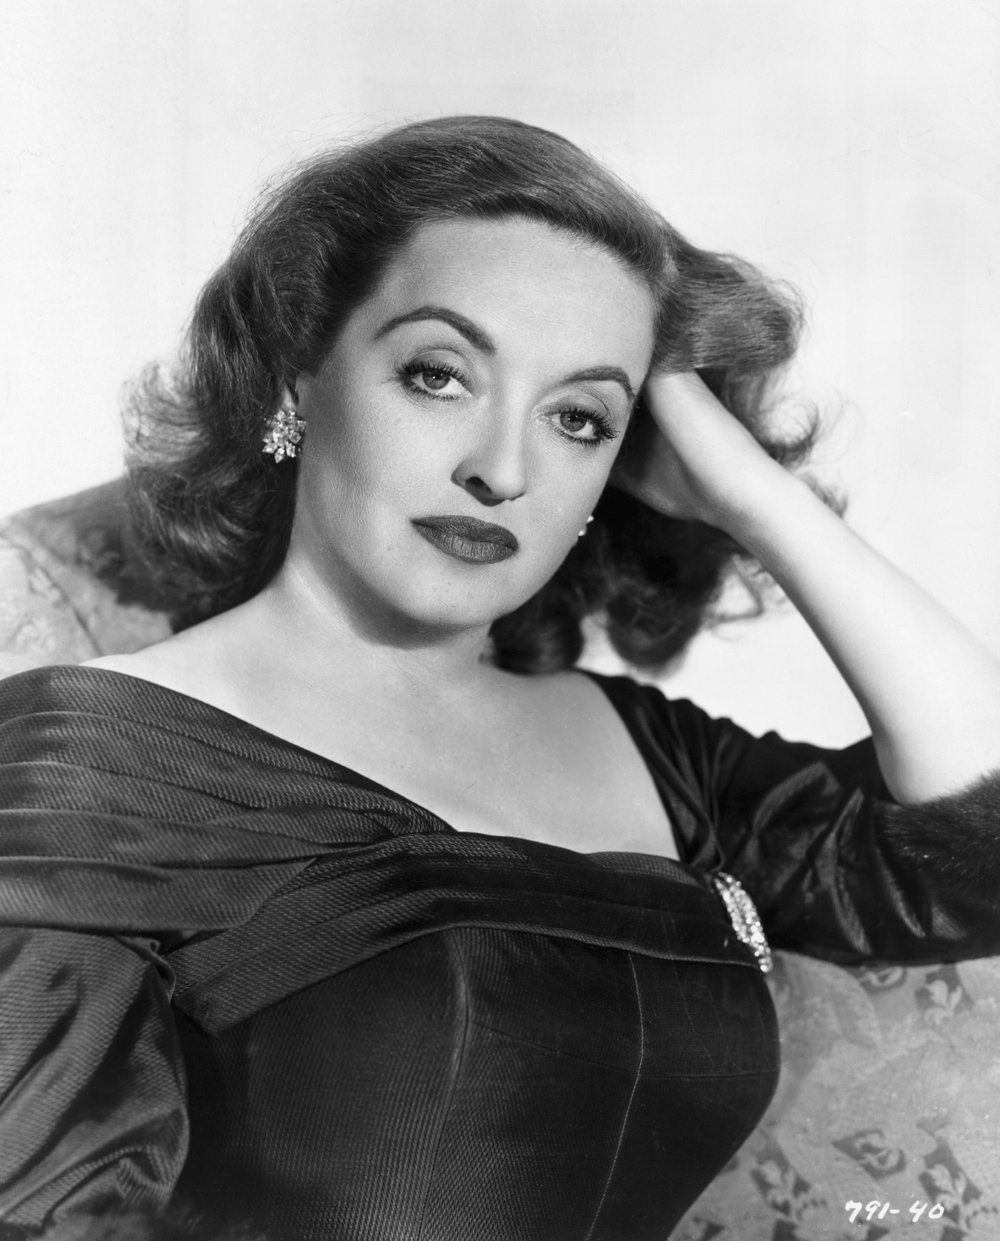 All About Eve - still